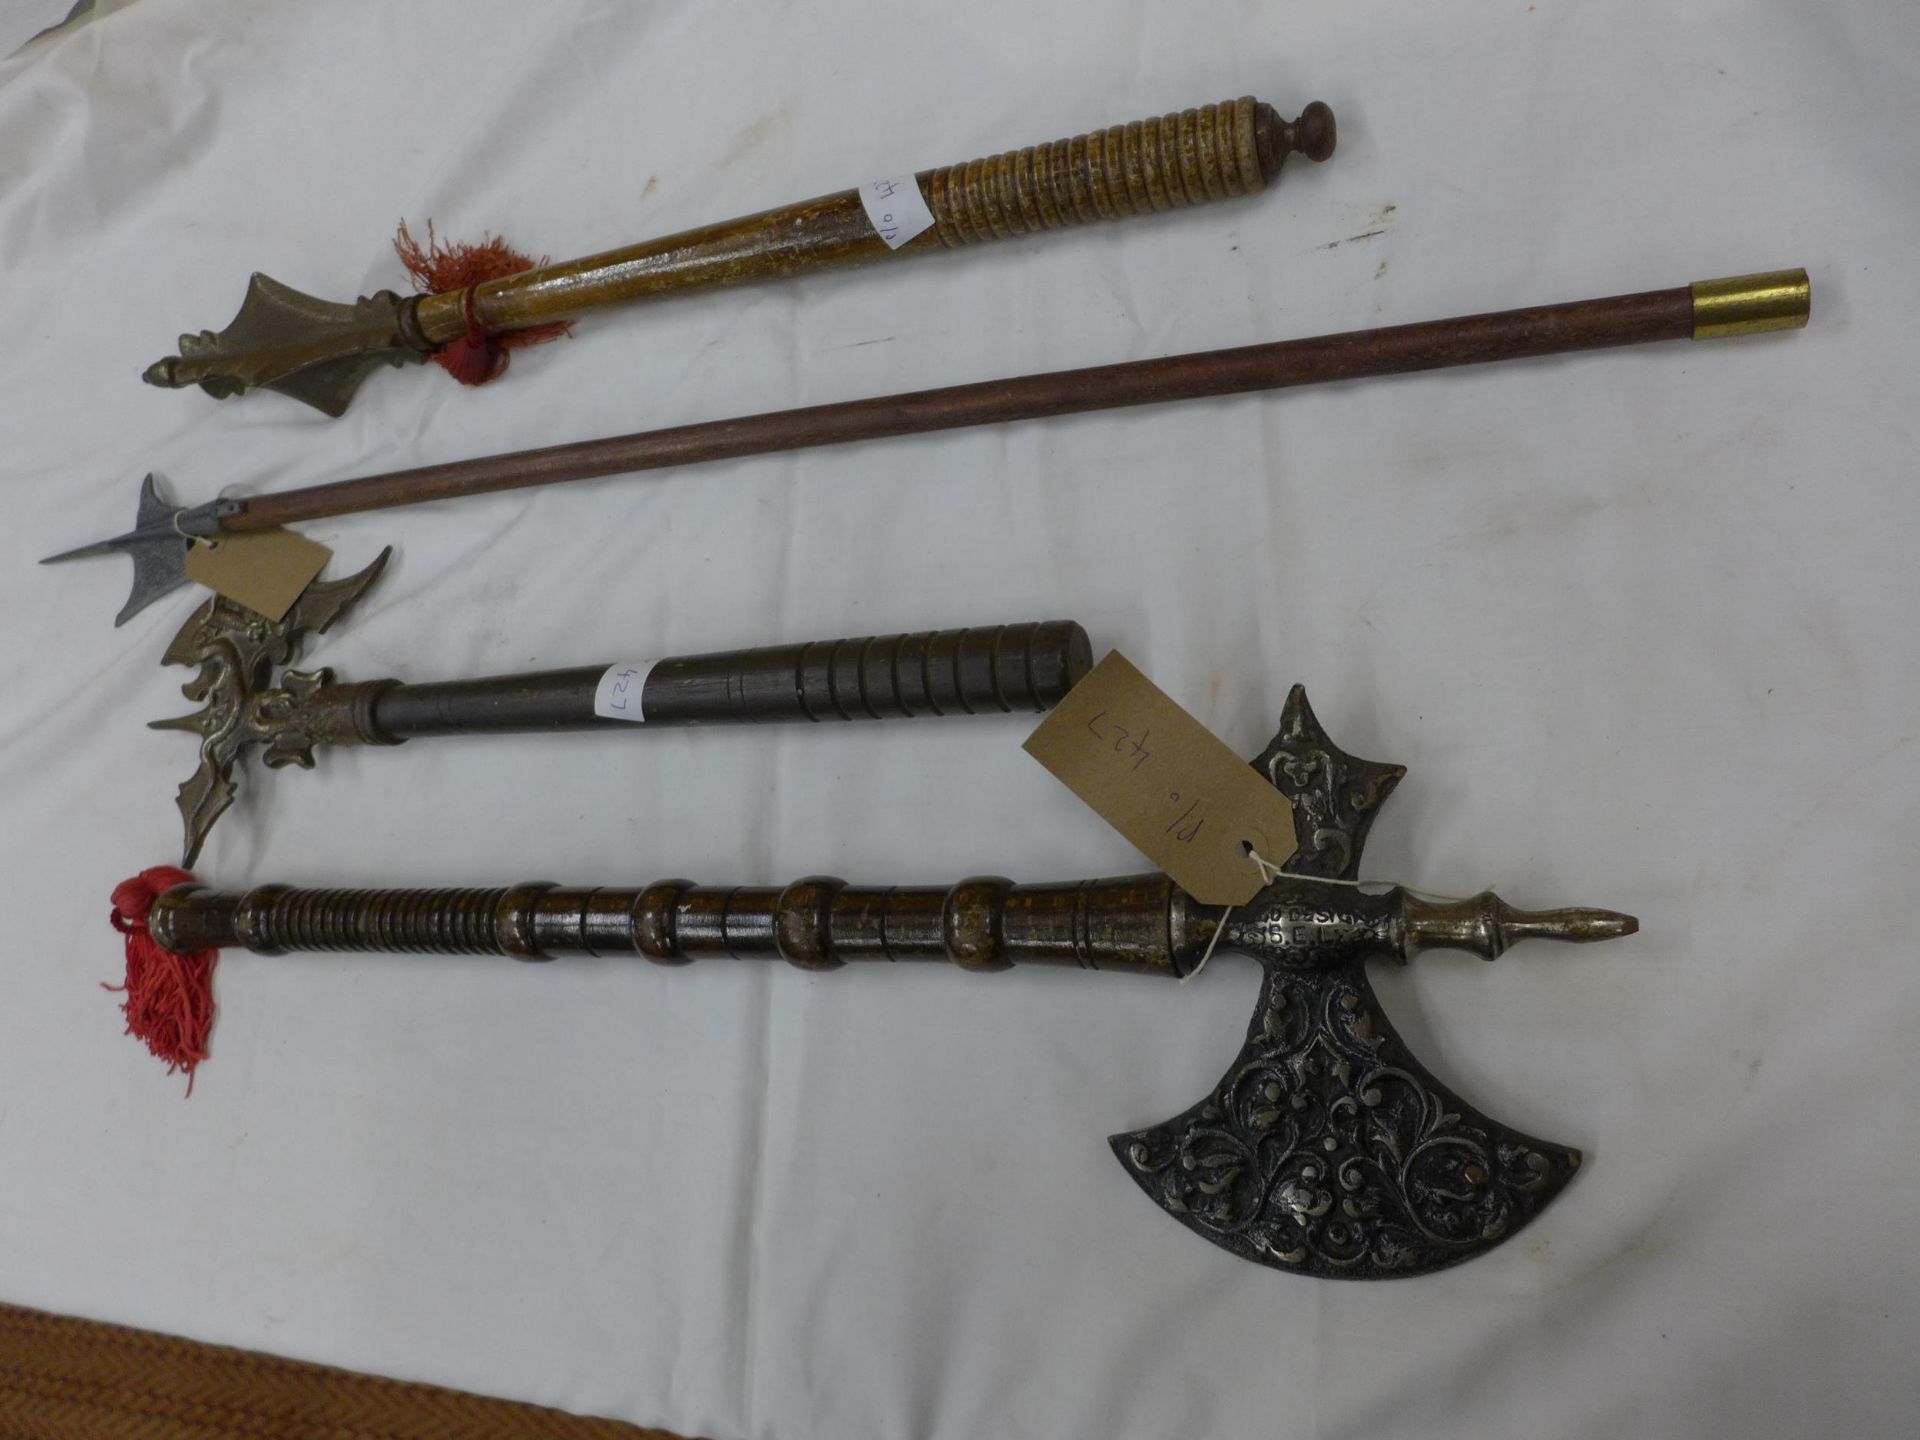 FOUR REPRODUCTION MEDIEVAL AXES - Image 3 of 3